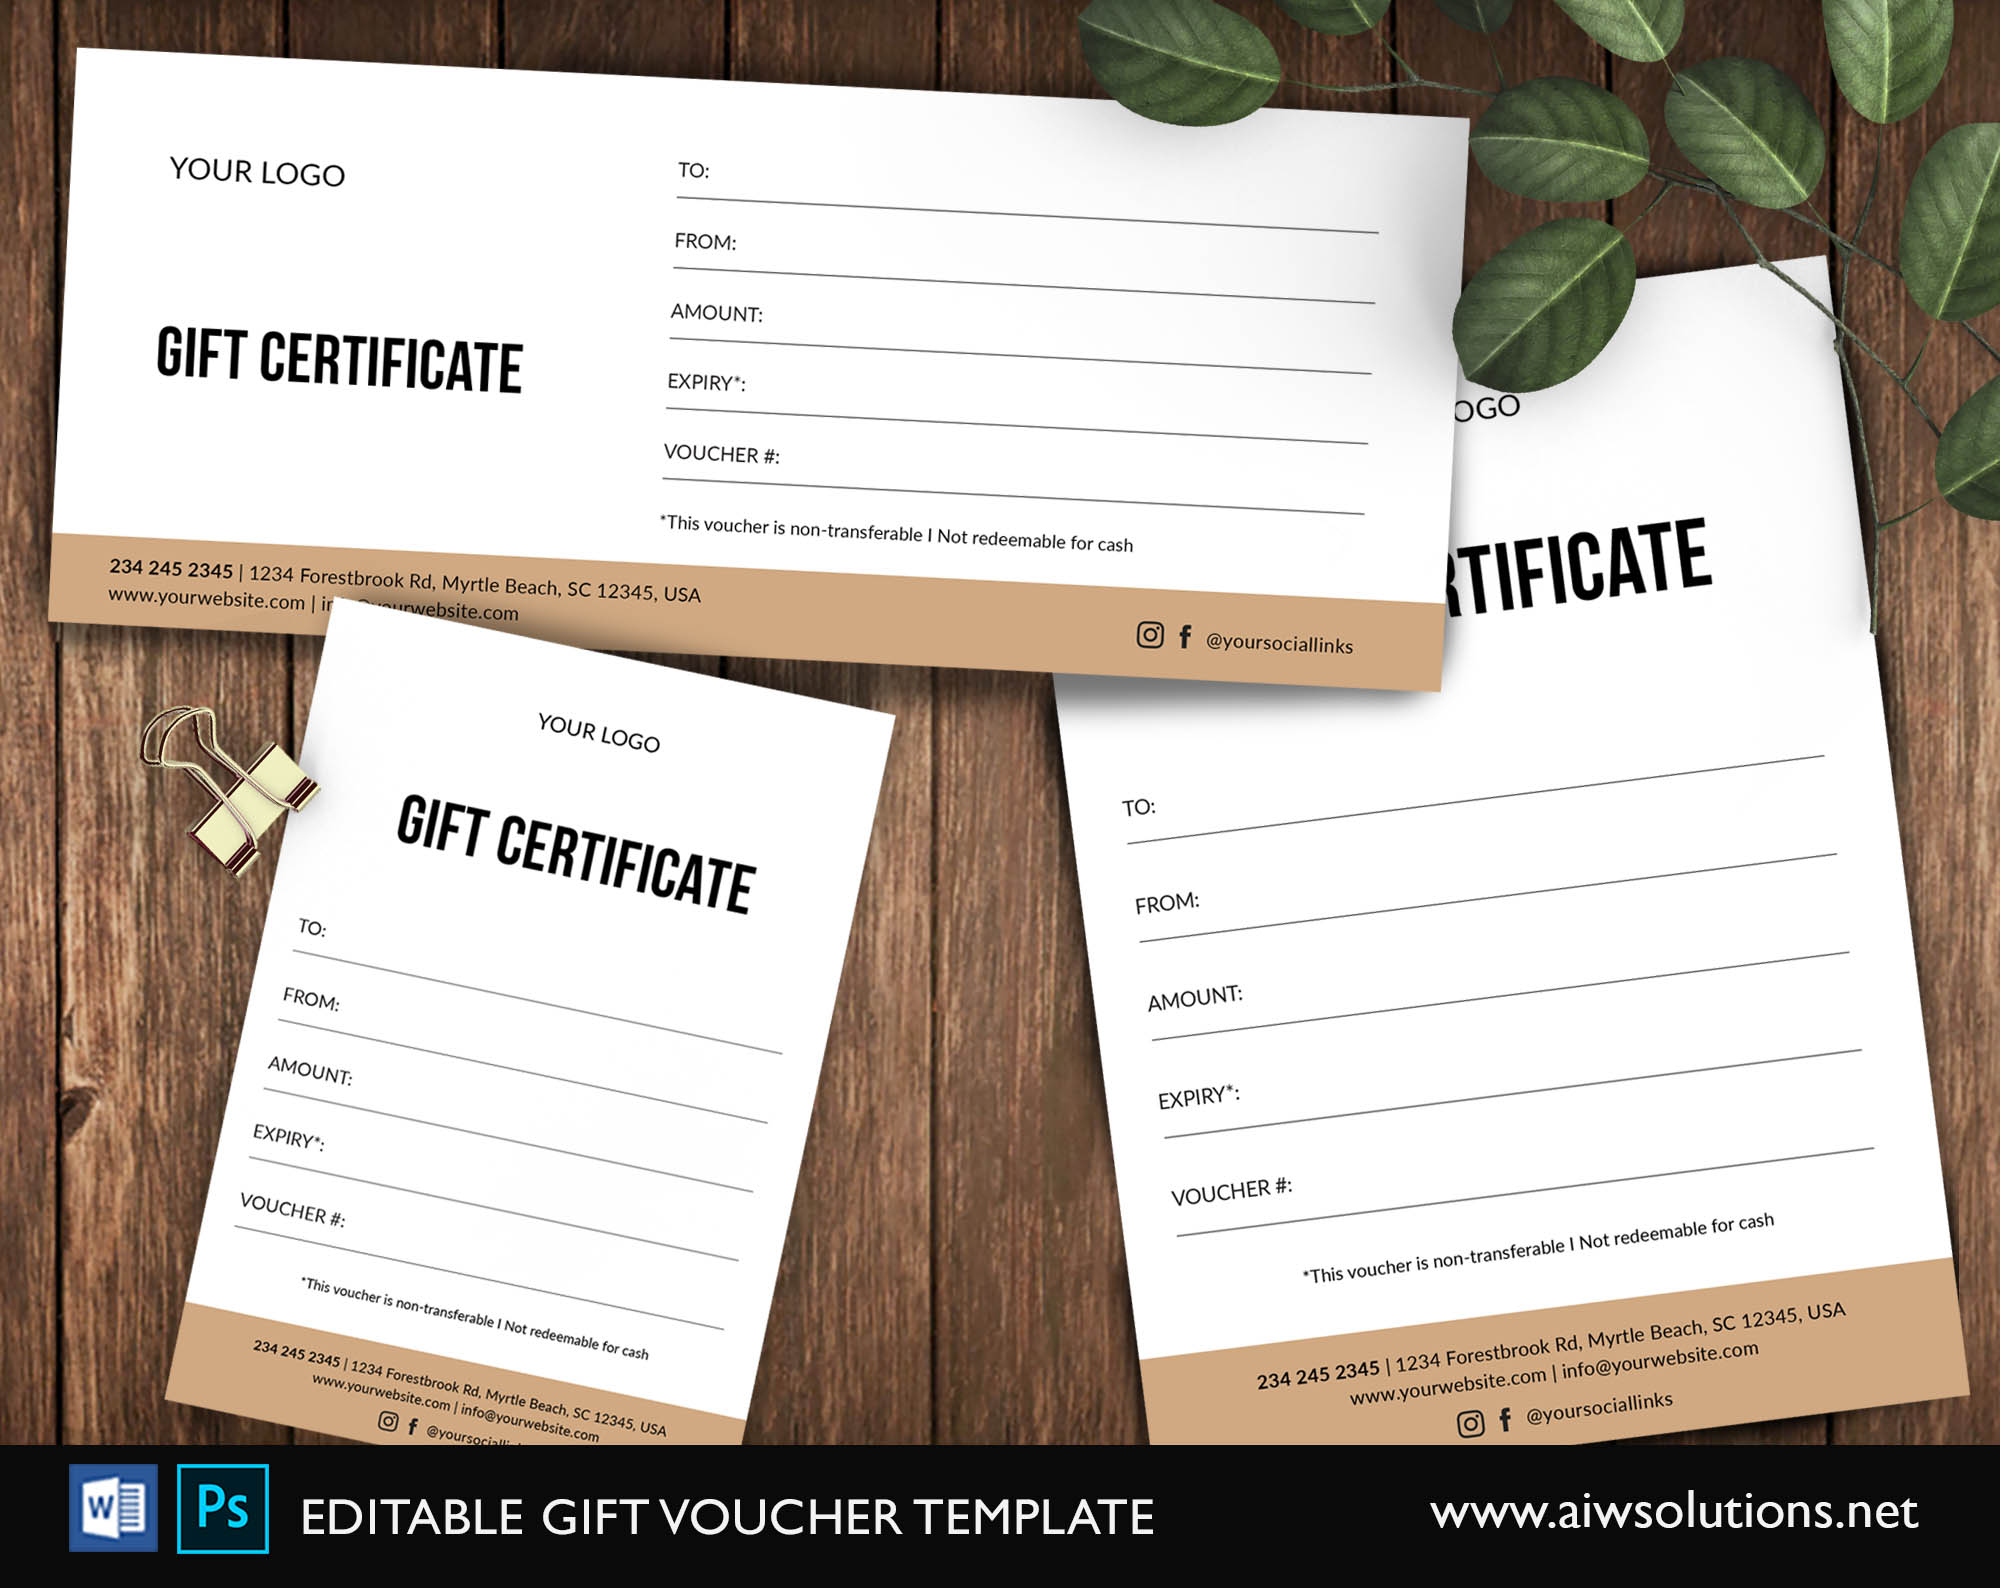 Paper Gift Certificate Template from aiwsolutions.net